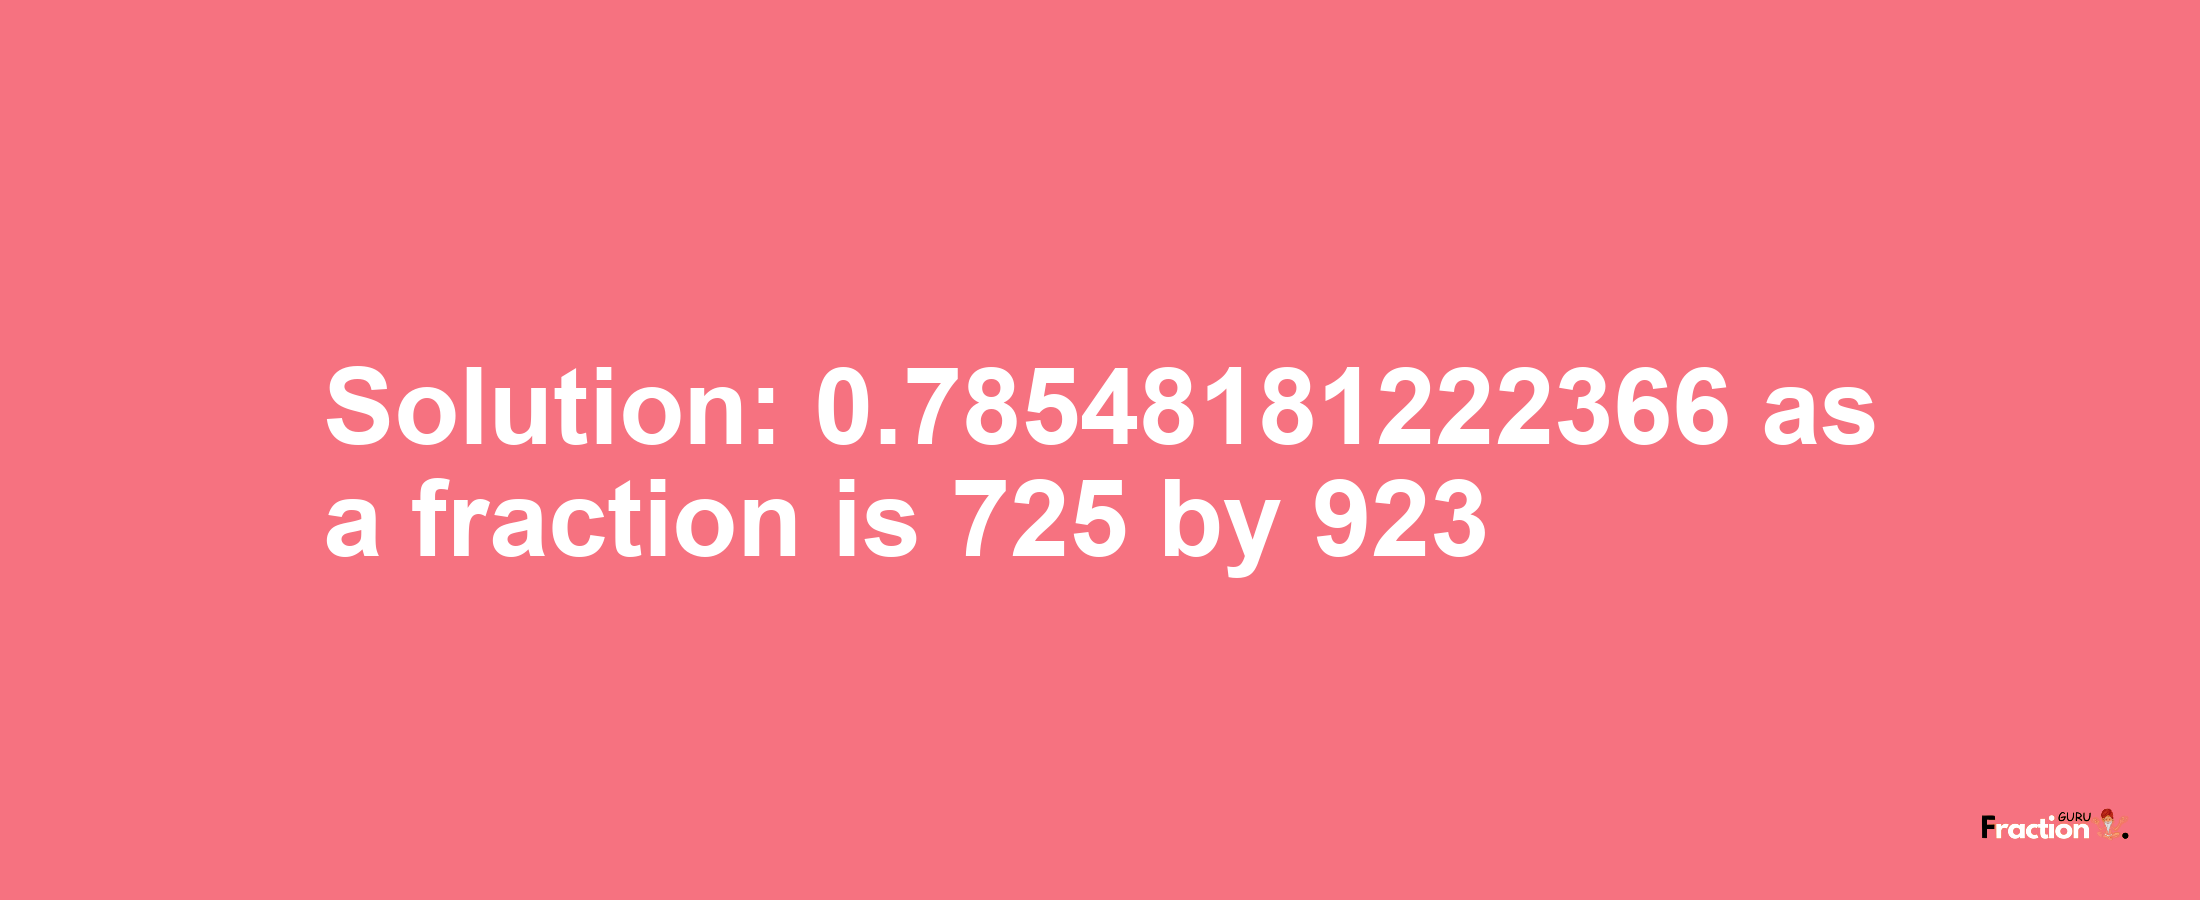 Solution:0.78548181222366 as a fraction is 725/923